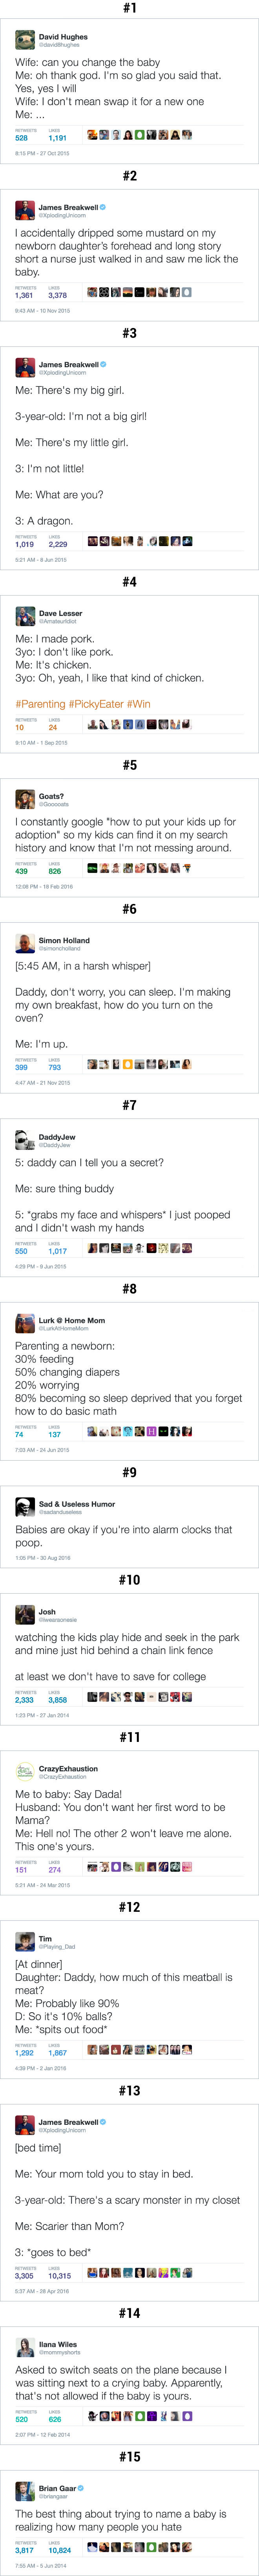 15 things you should know about having children before you have children